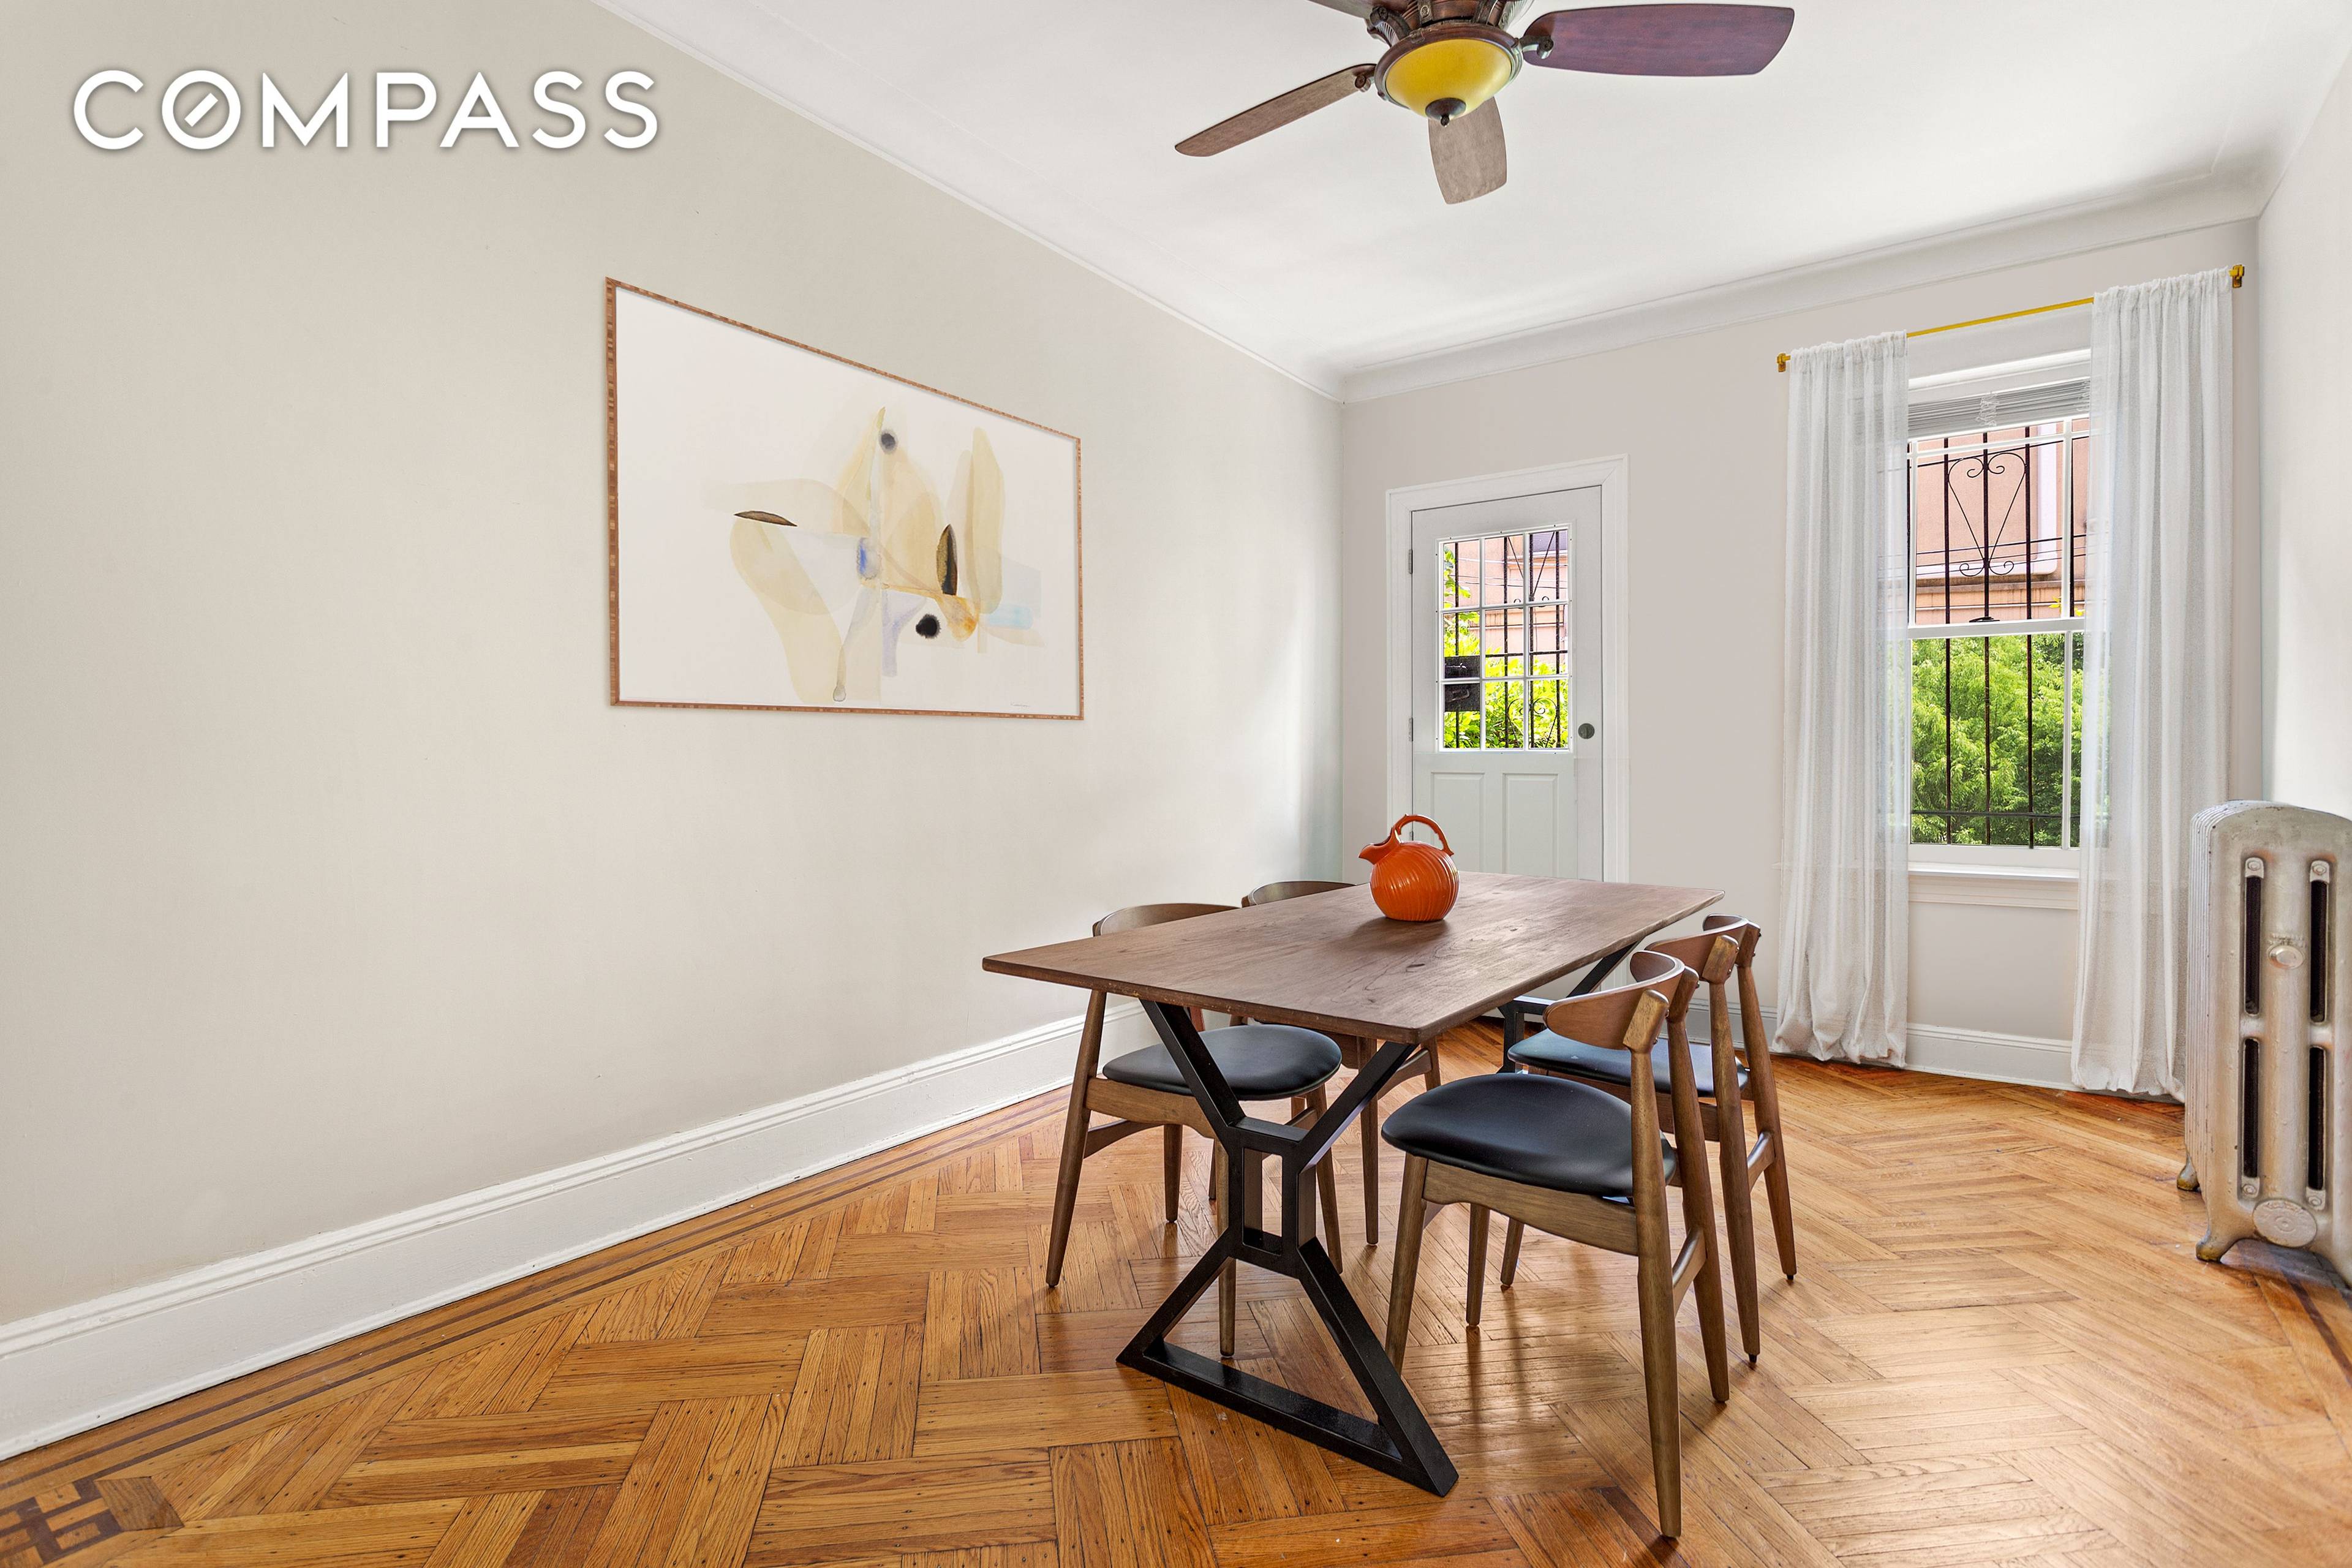 A dreamy house and a rare opportunity to own a townhouse facing Prospect Park awaits.